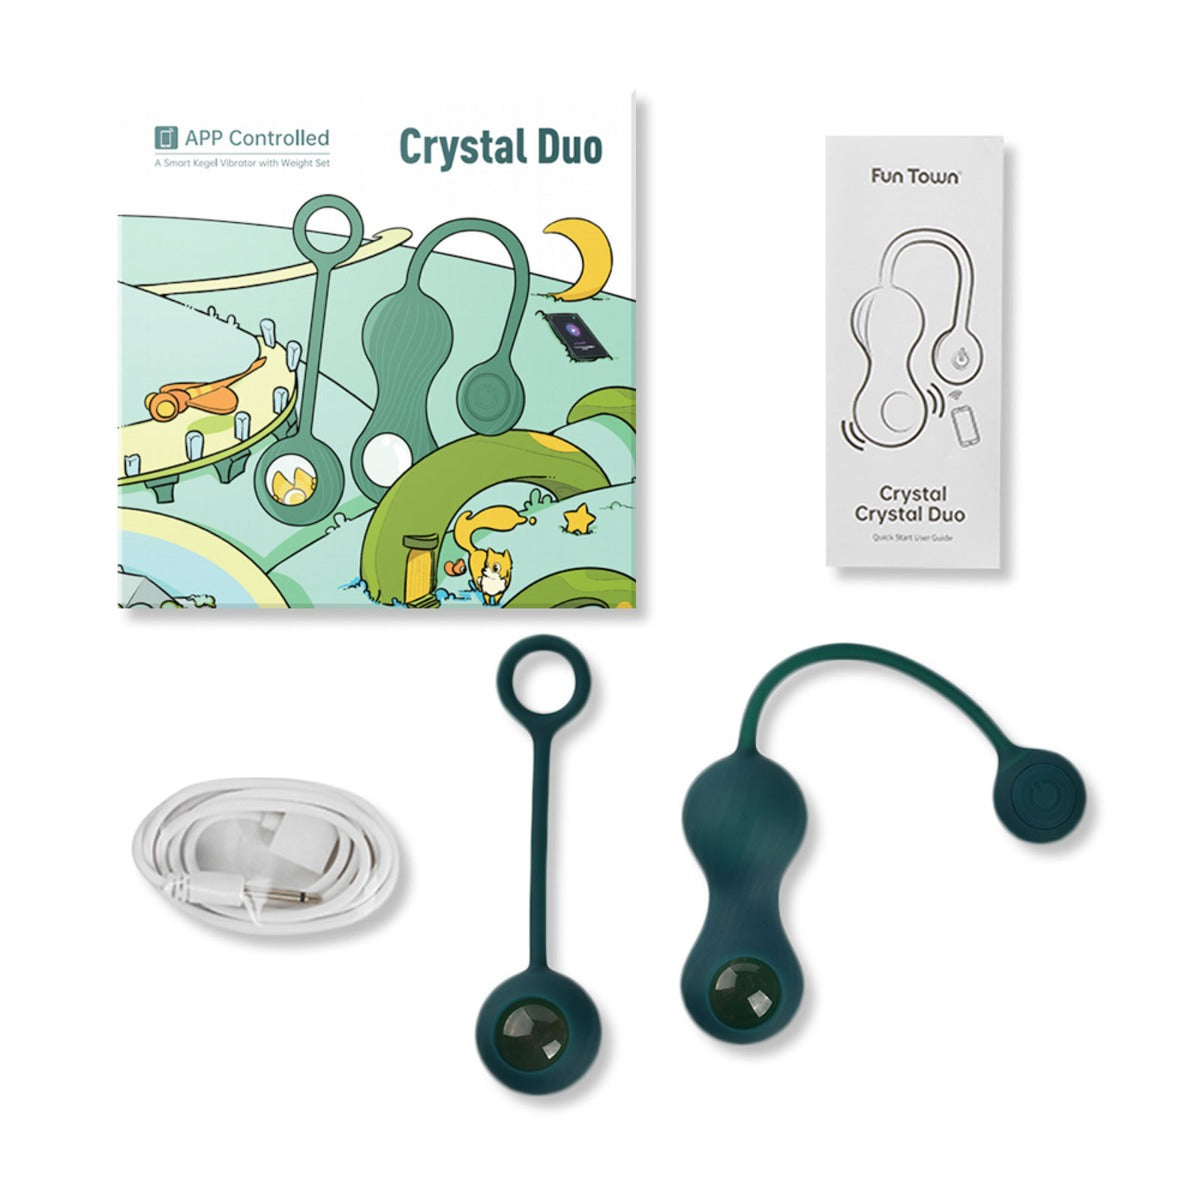 Magic Motion | Duo Smart Kegel Vibrator with Weights - Green